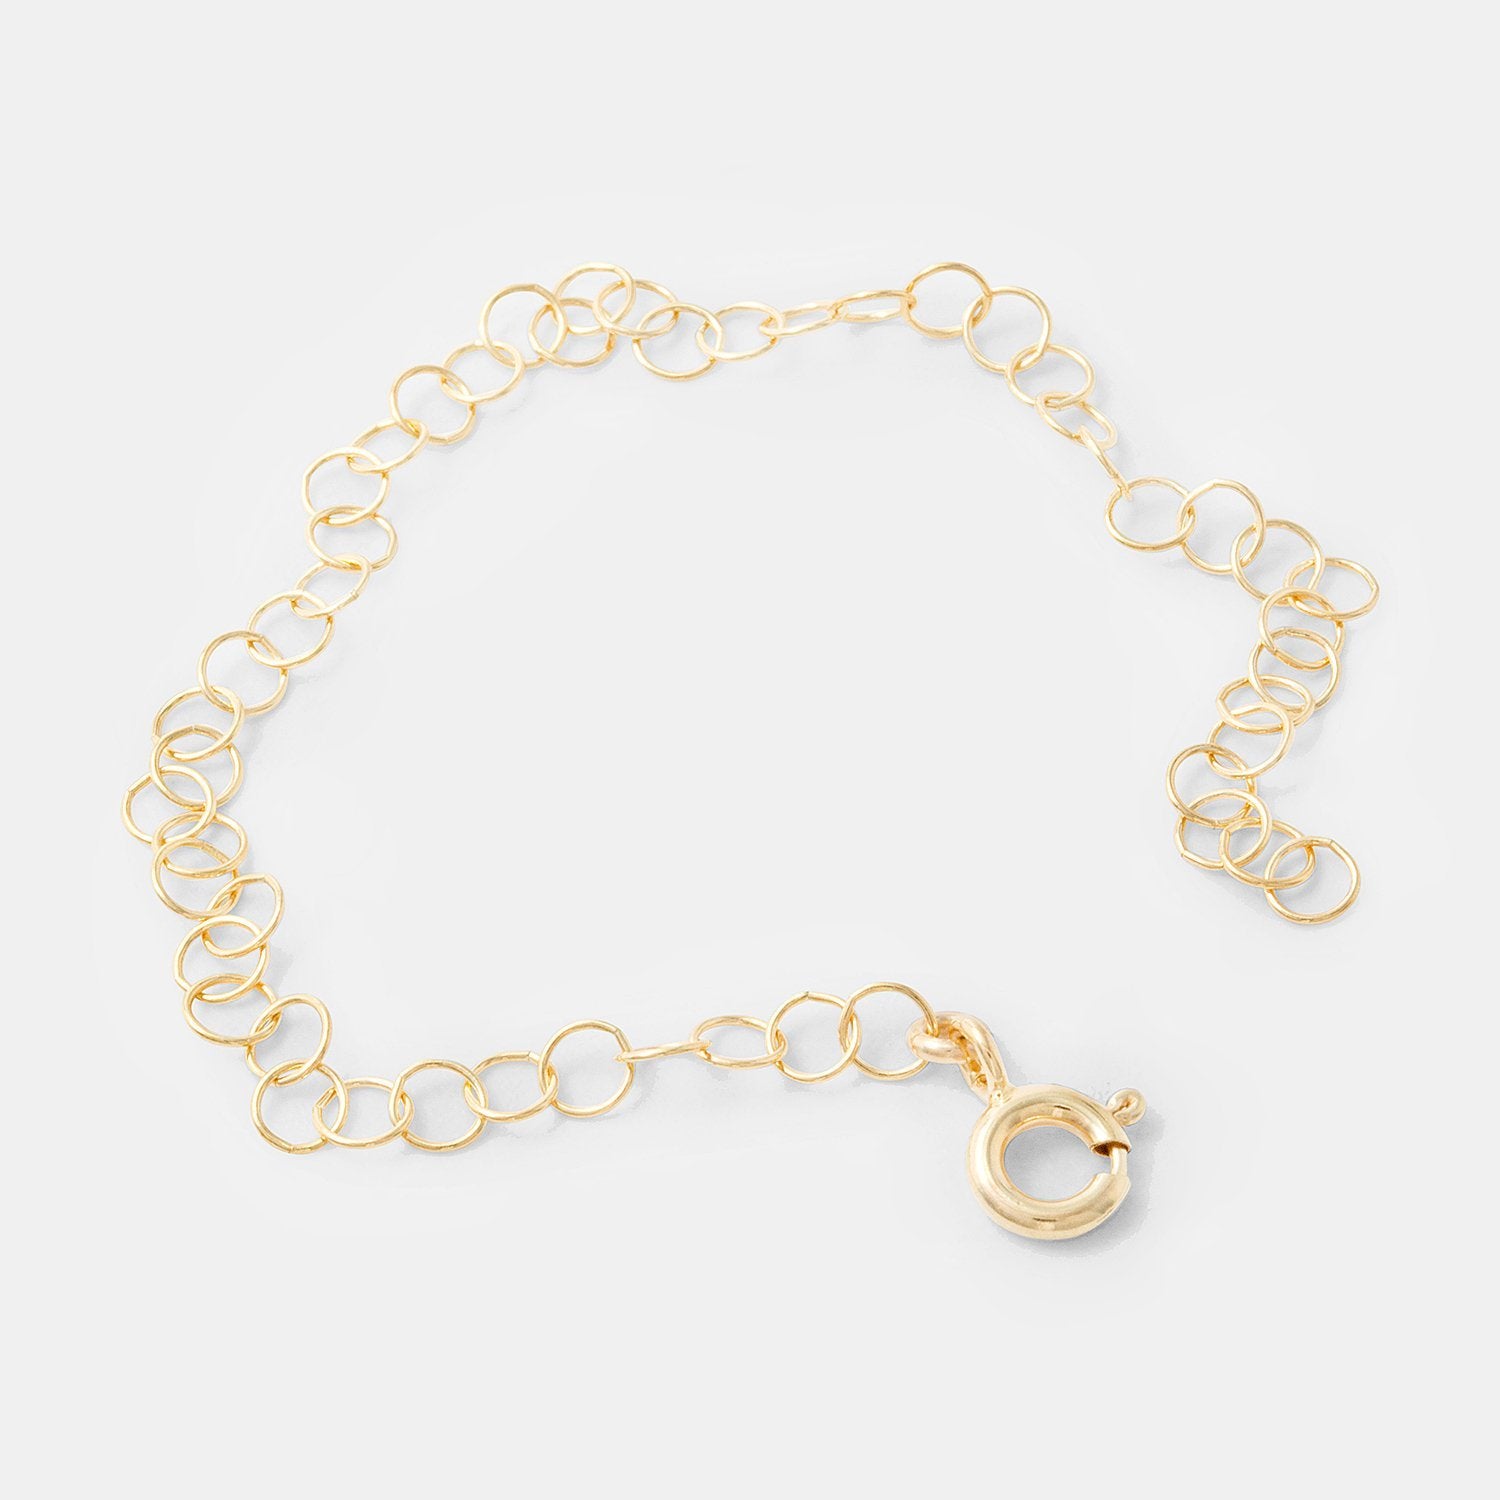 Necklace chain extender: gold - Simone Walsh Jewellery Australia